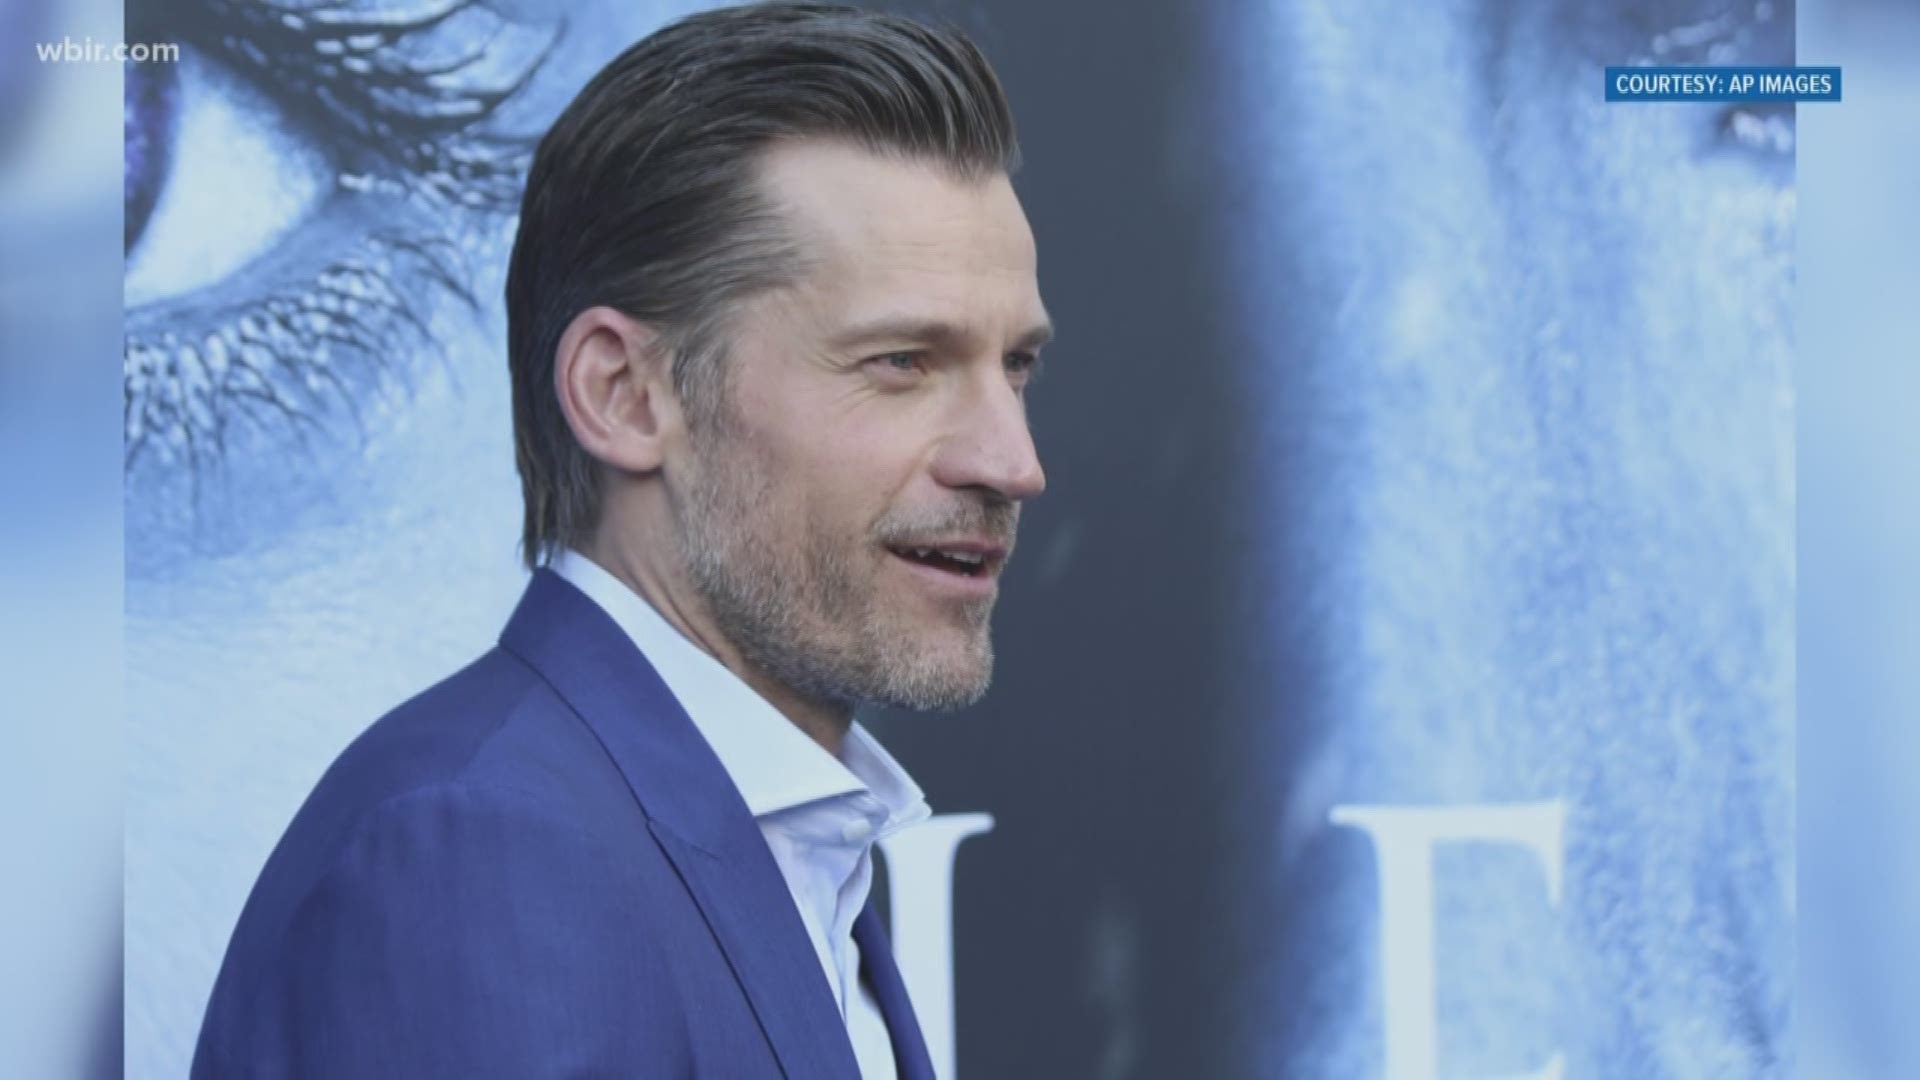 Nikolaj Coster-Waldeau plays Jamie Lannister on Thrones. He will be at "Bubba Fest" this August at  the Knoxville Convention Center.